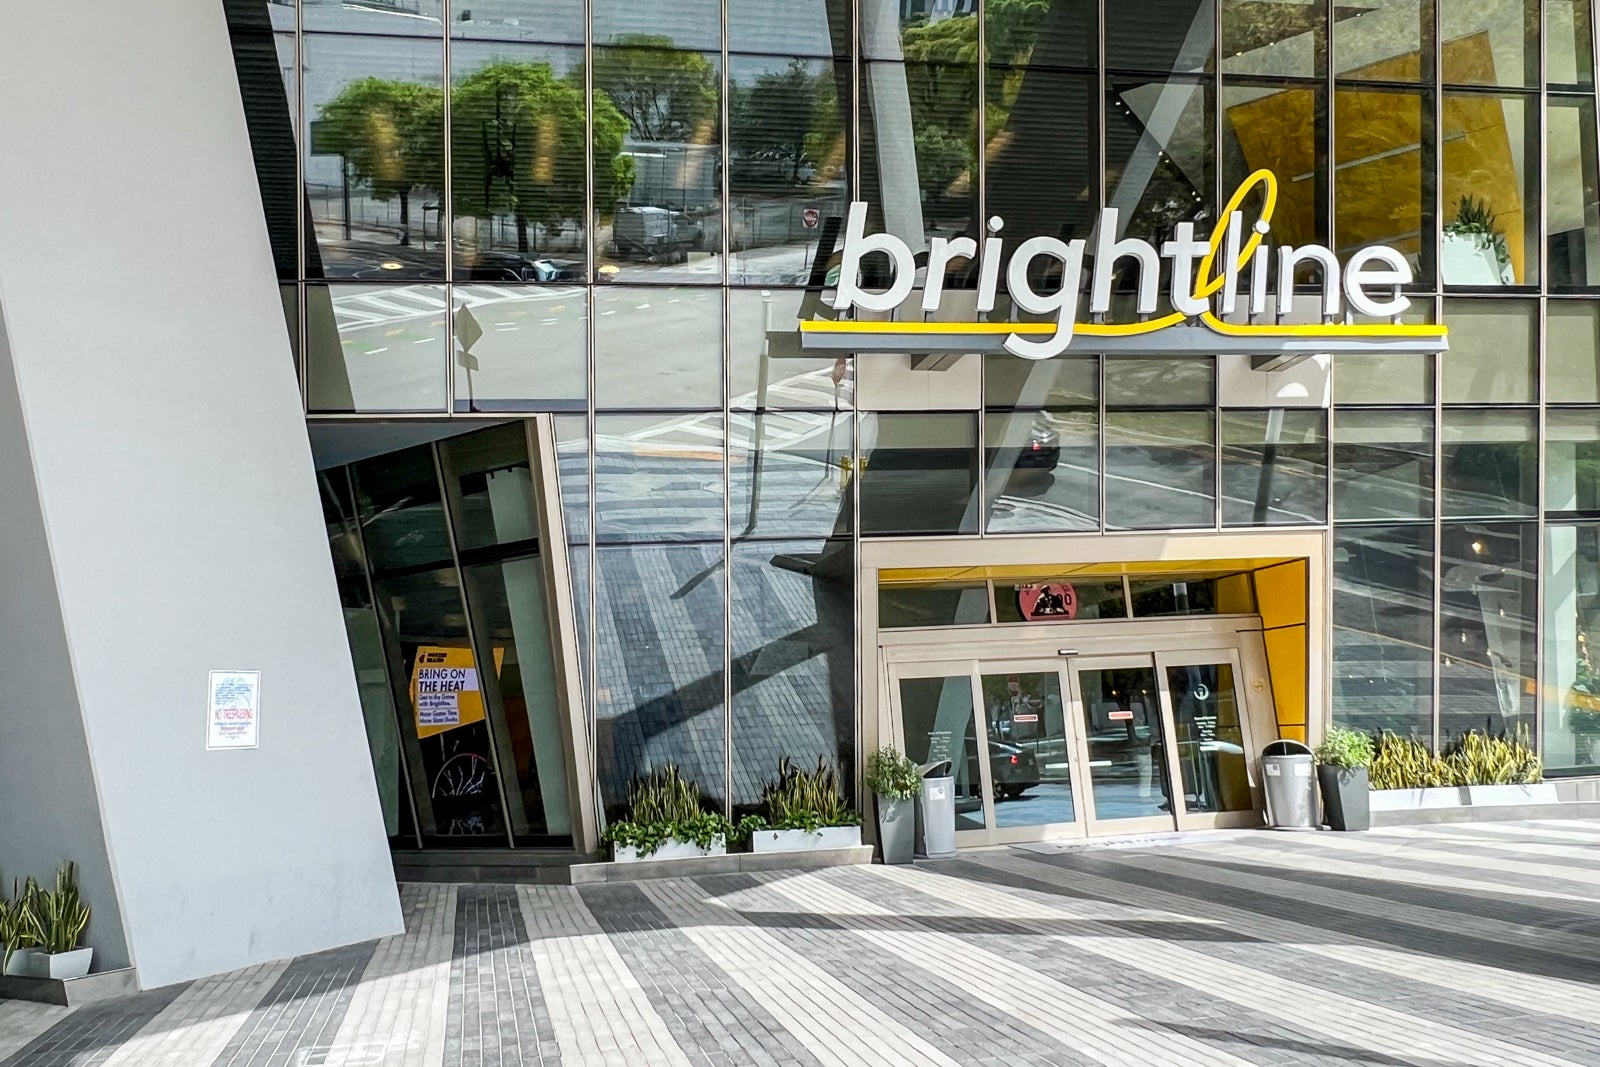 An exterior shot showing the entrance to the Brightline station in Miami